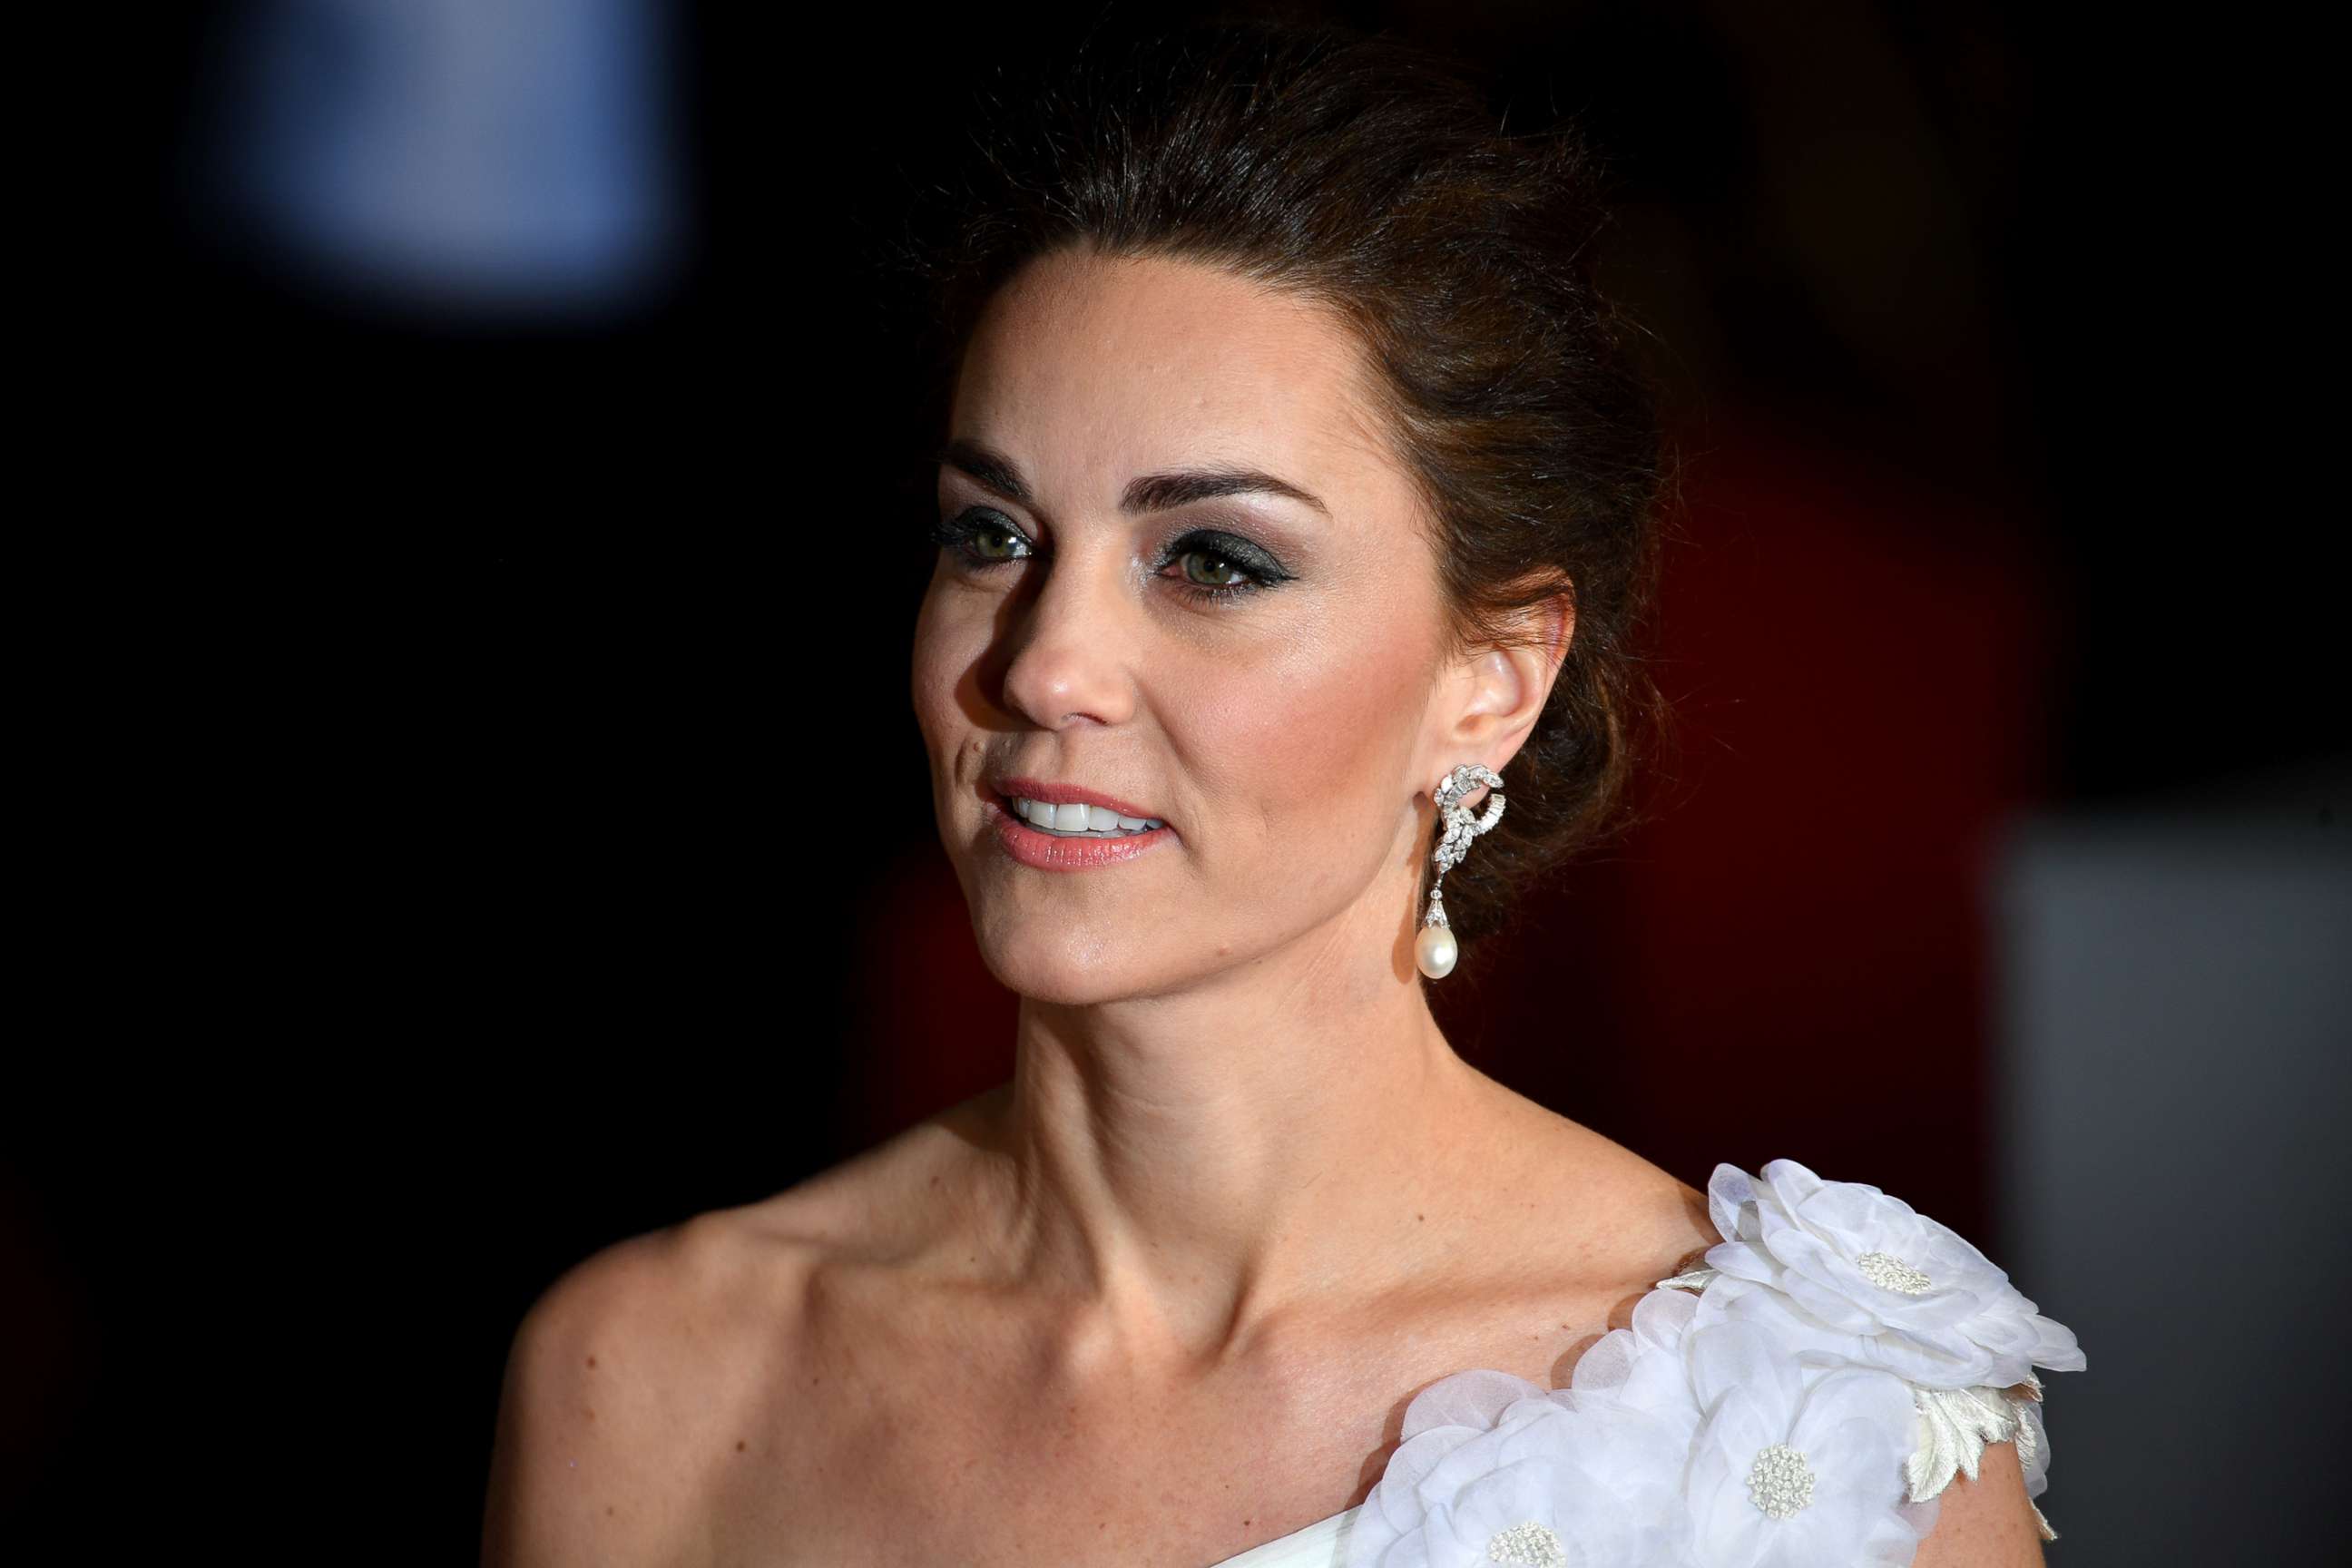 PHOTO: Catherine, Duchess of Cambridge attends the EE British Academy Film Awards at Royal Albert Hall on Feb. 10, 2019 in London.